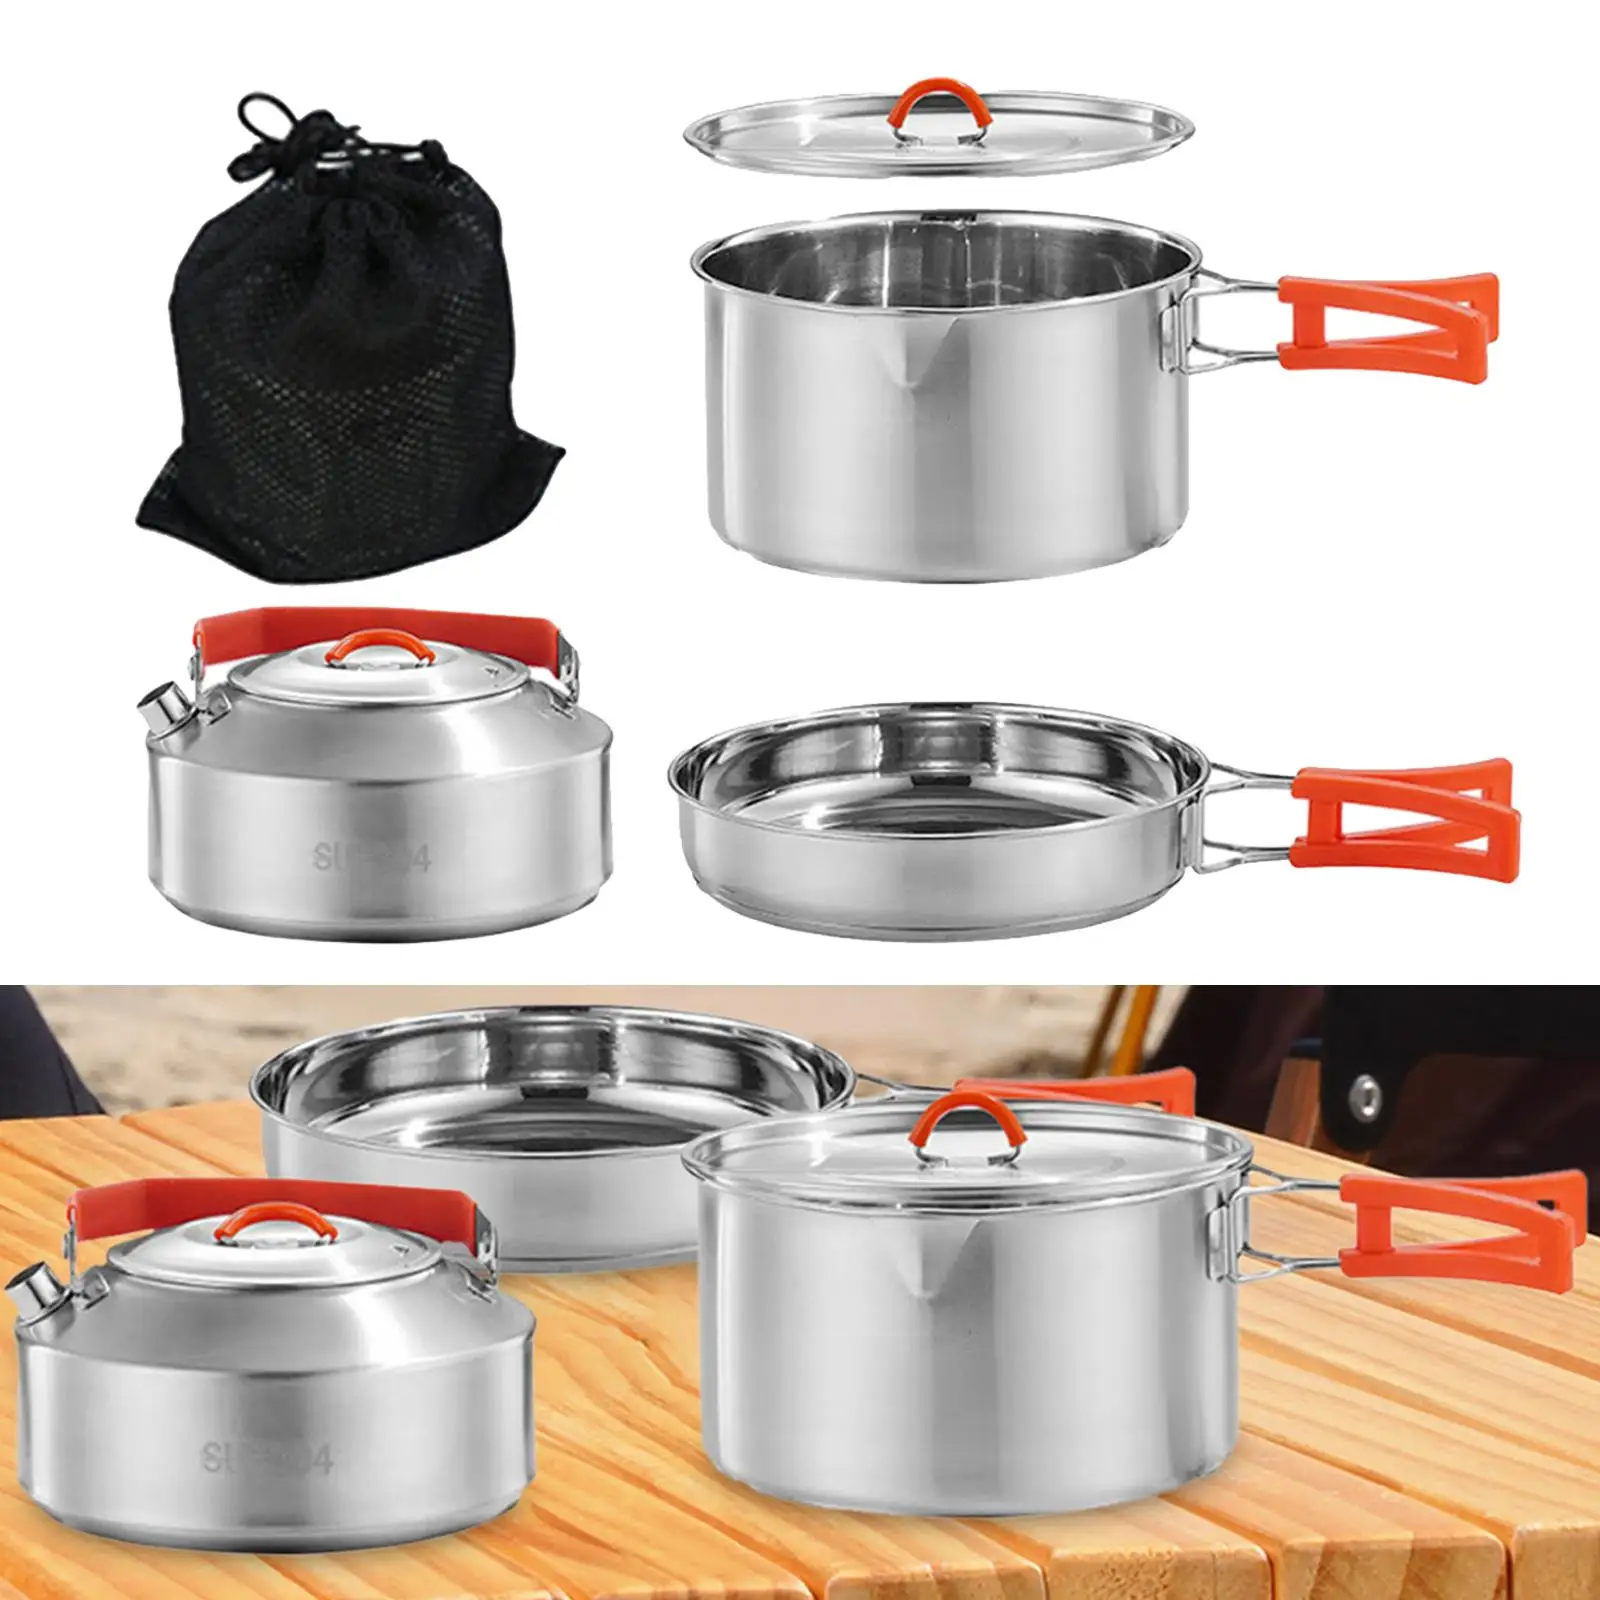 Camping Cookware Easy to Clean for Campfire Camping Pot and Pan Set for Camp